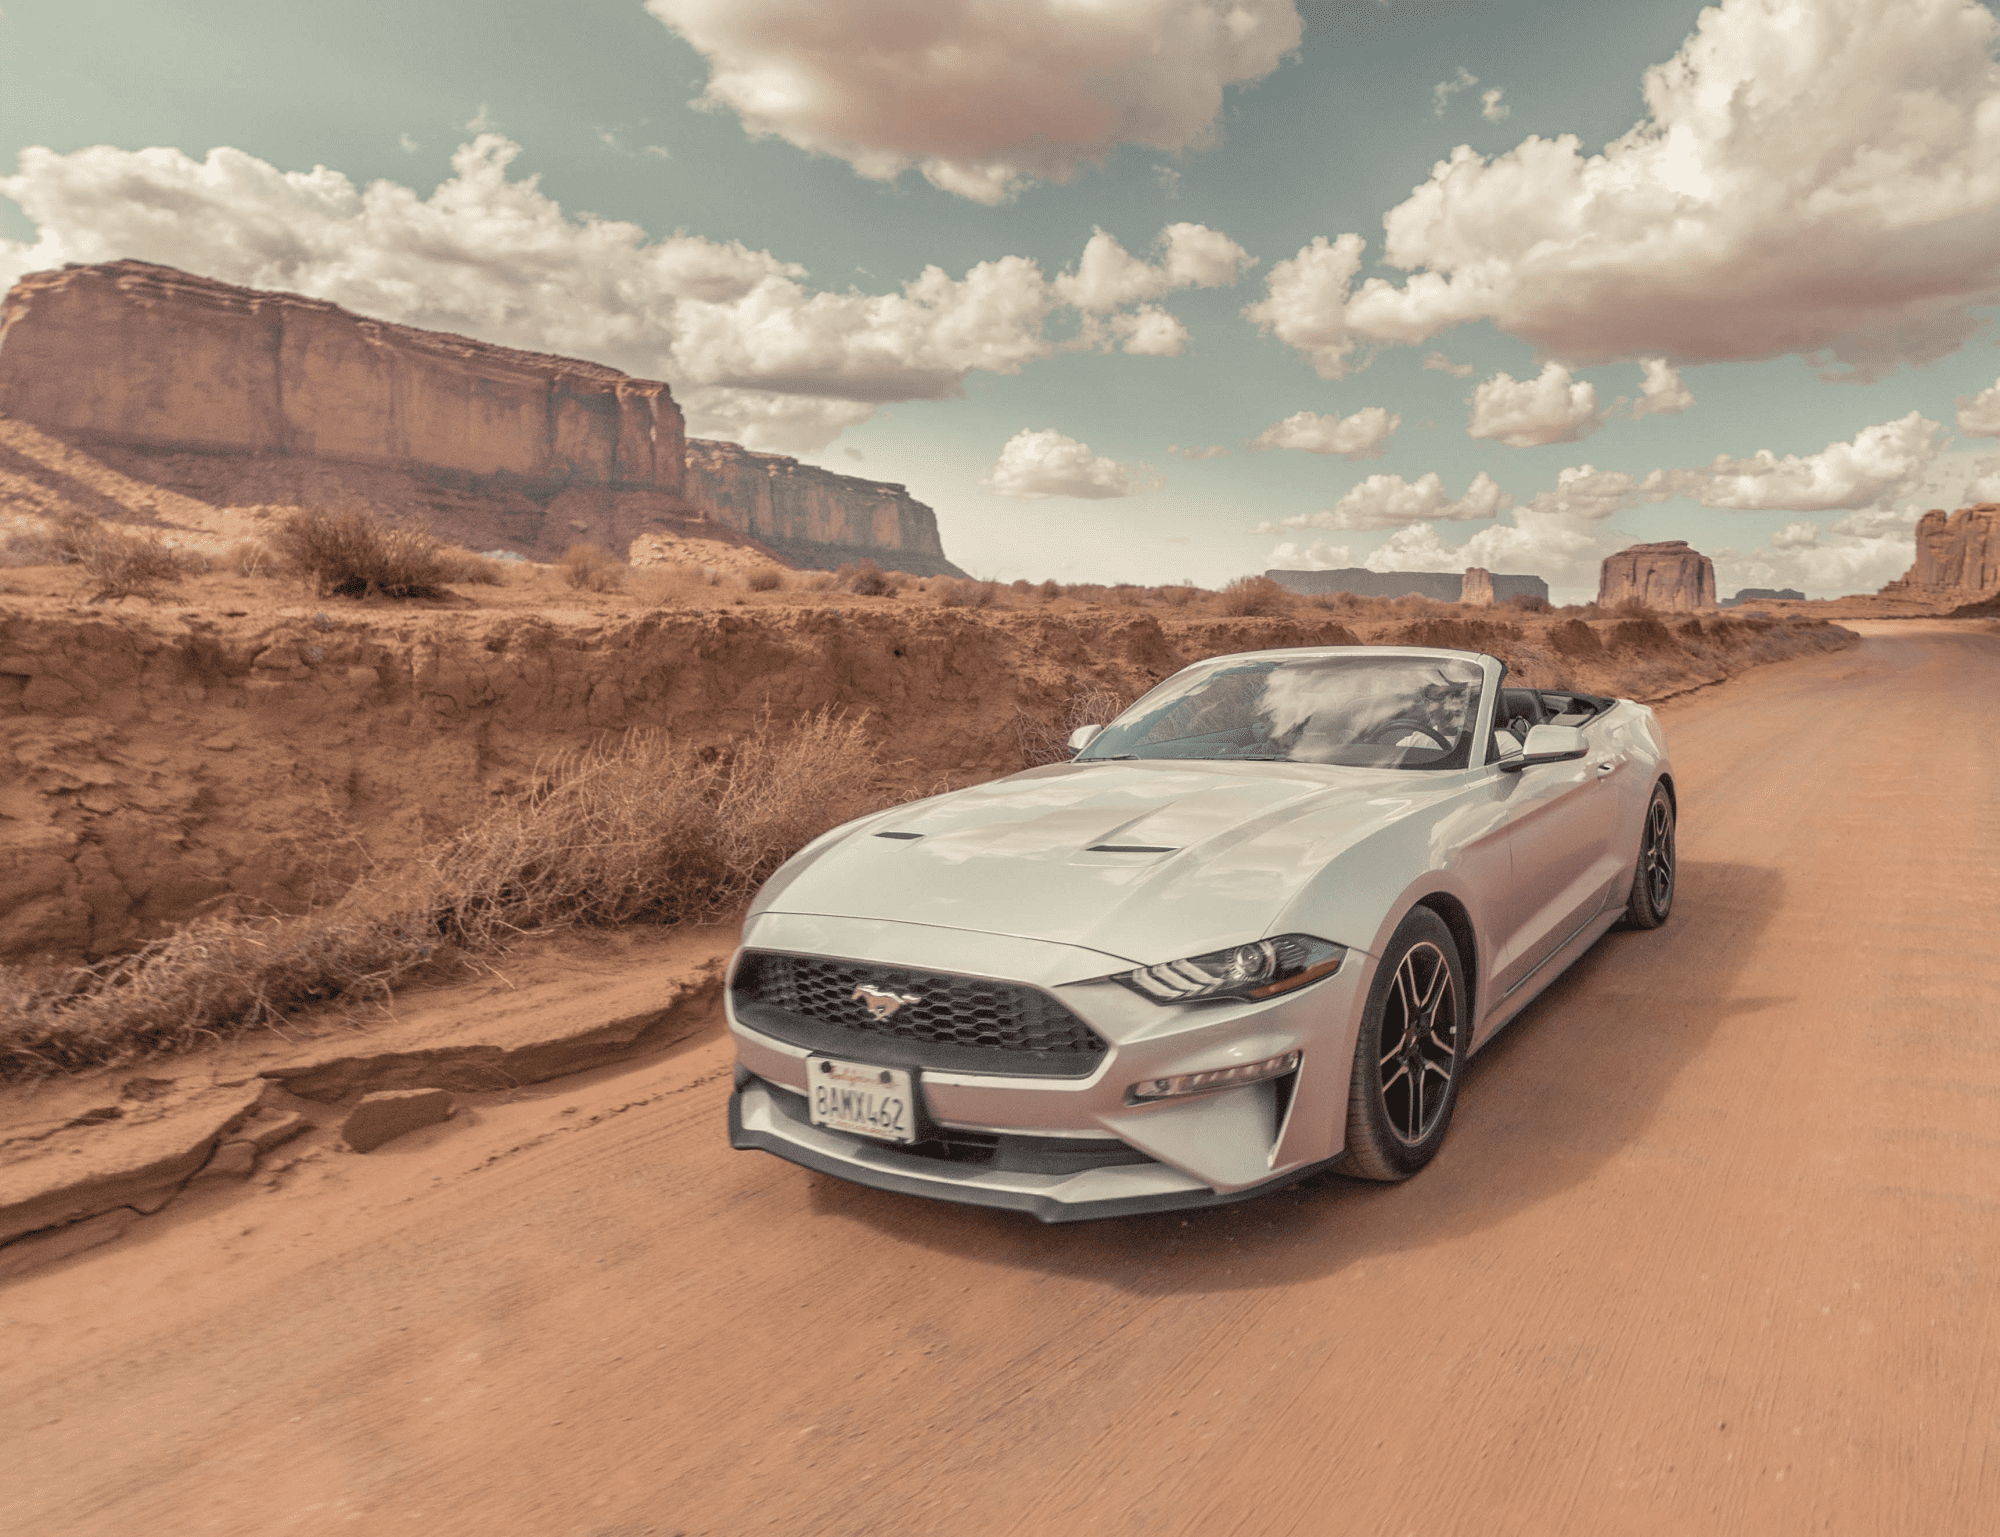 Ford Mustang driving on dirt road.